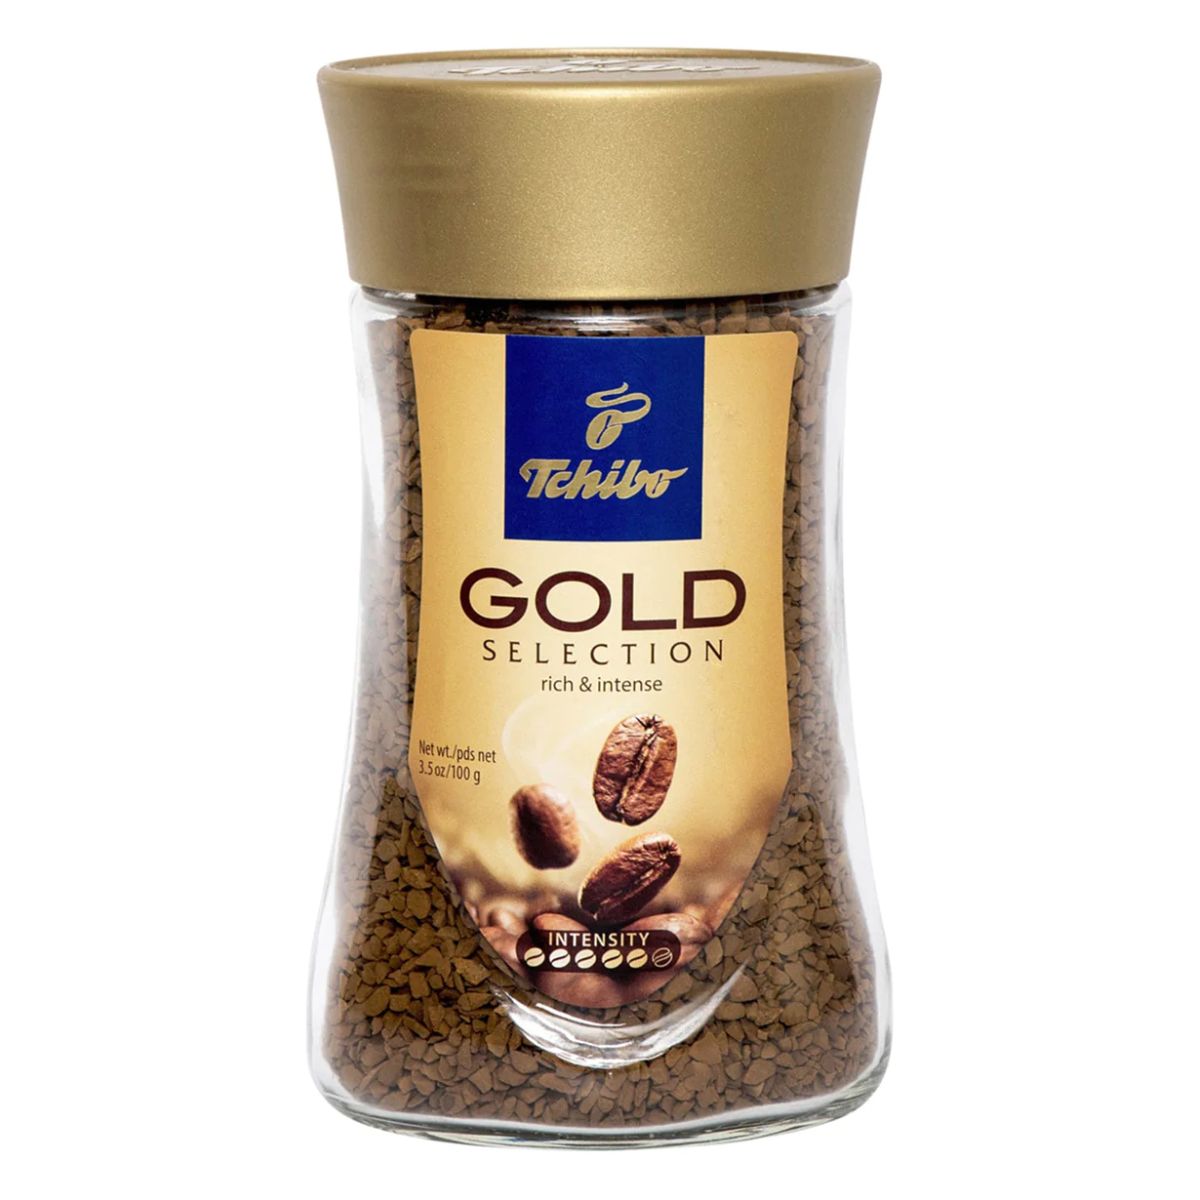 A jar of Tchibo - Gold Selection Instant Coffee (100g) with a gold lid.